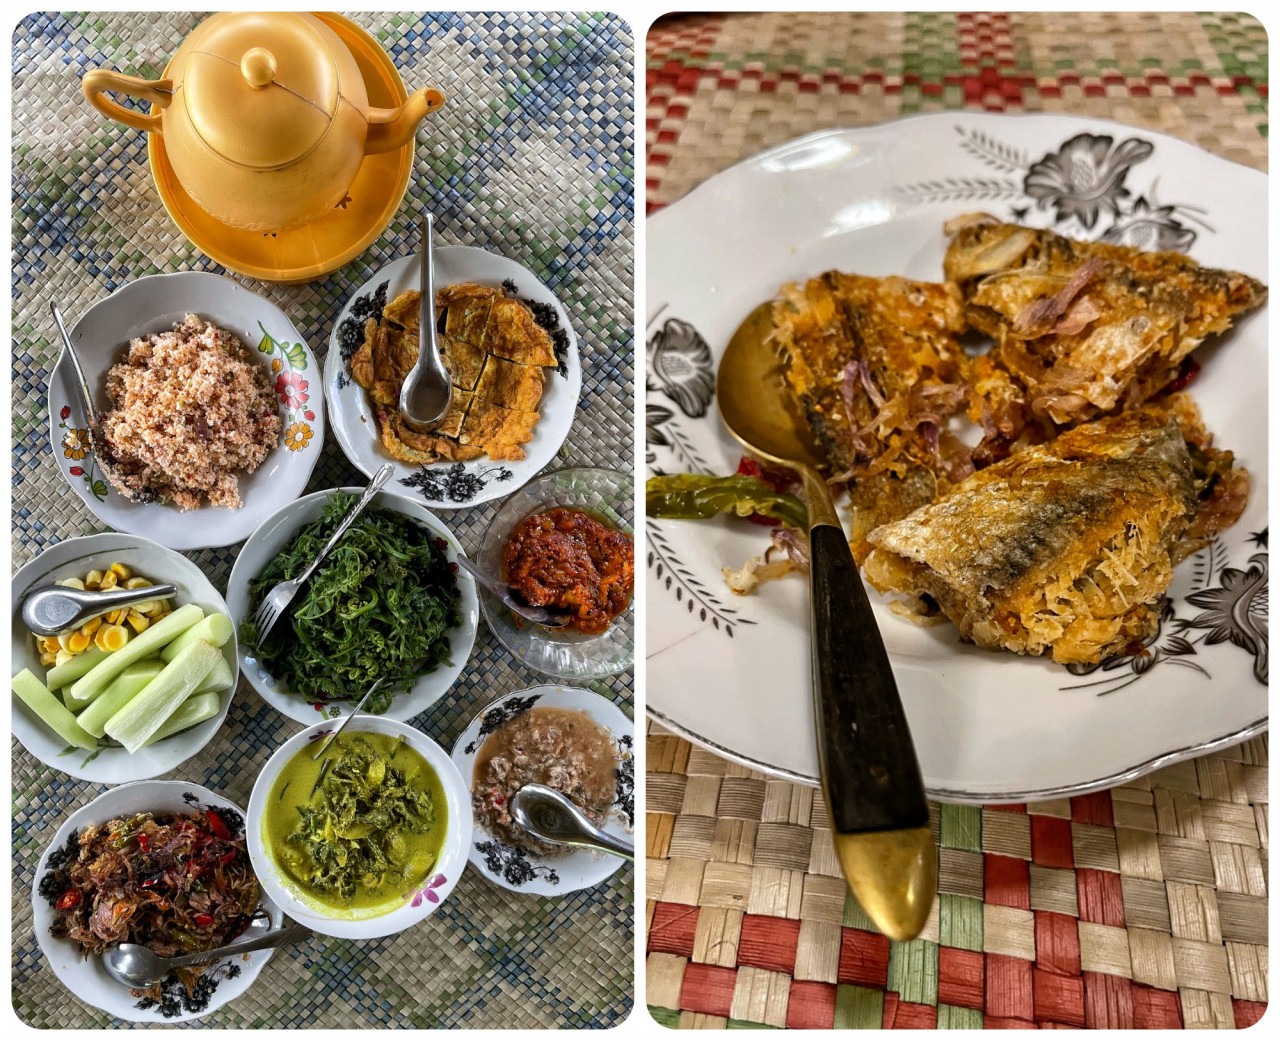 A colourful lunch courtesy of Mak Ani, and pekasam, cured and fermented loma frish that's been fried. – Pics by Shireen Zainudin